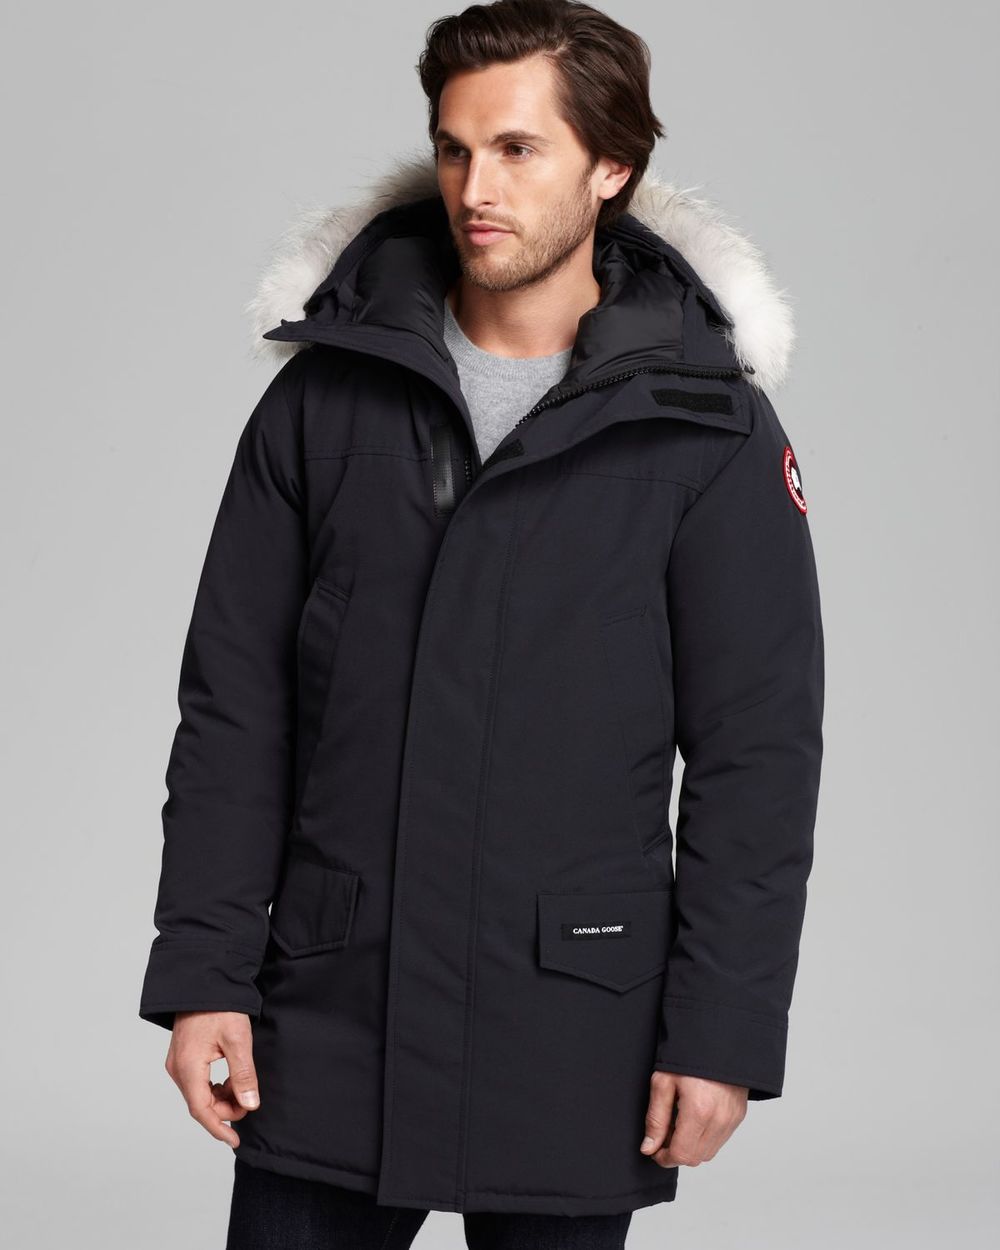 Canada Goose expedition parka replica authentic - 9 Canada Goose Alternatives To Fit Every Budget �� AS RAKESTRAW ...